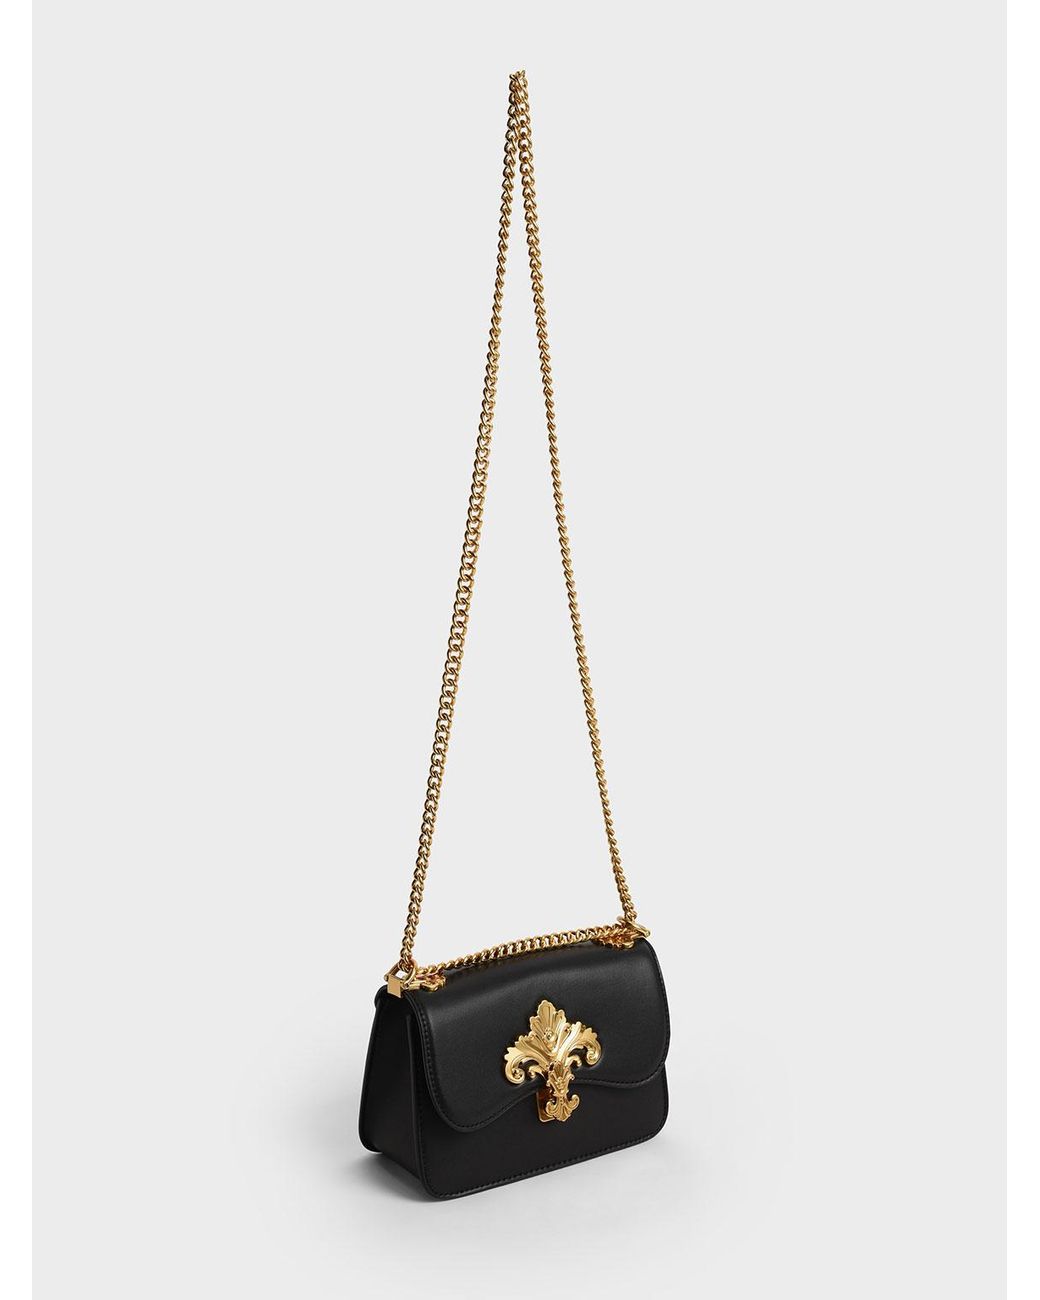 19 Best Chain Bags for True Fashionistas: Chain Strap Bags